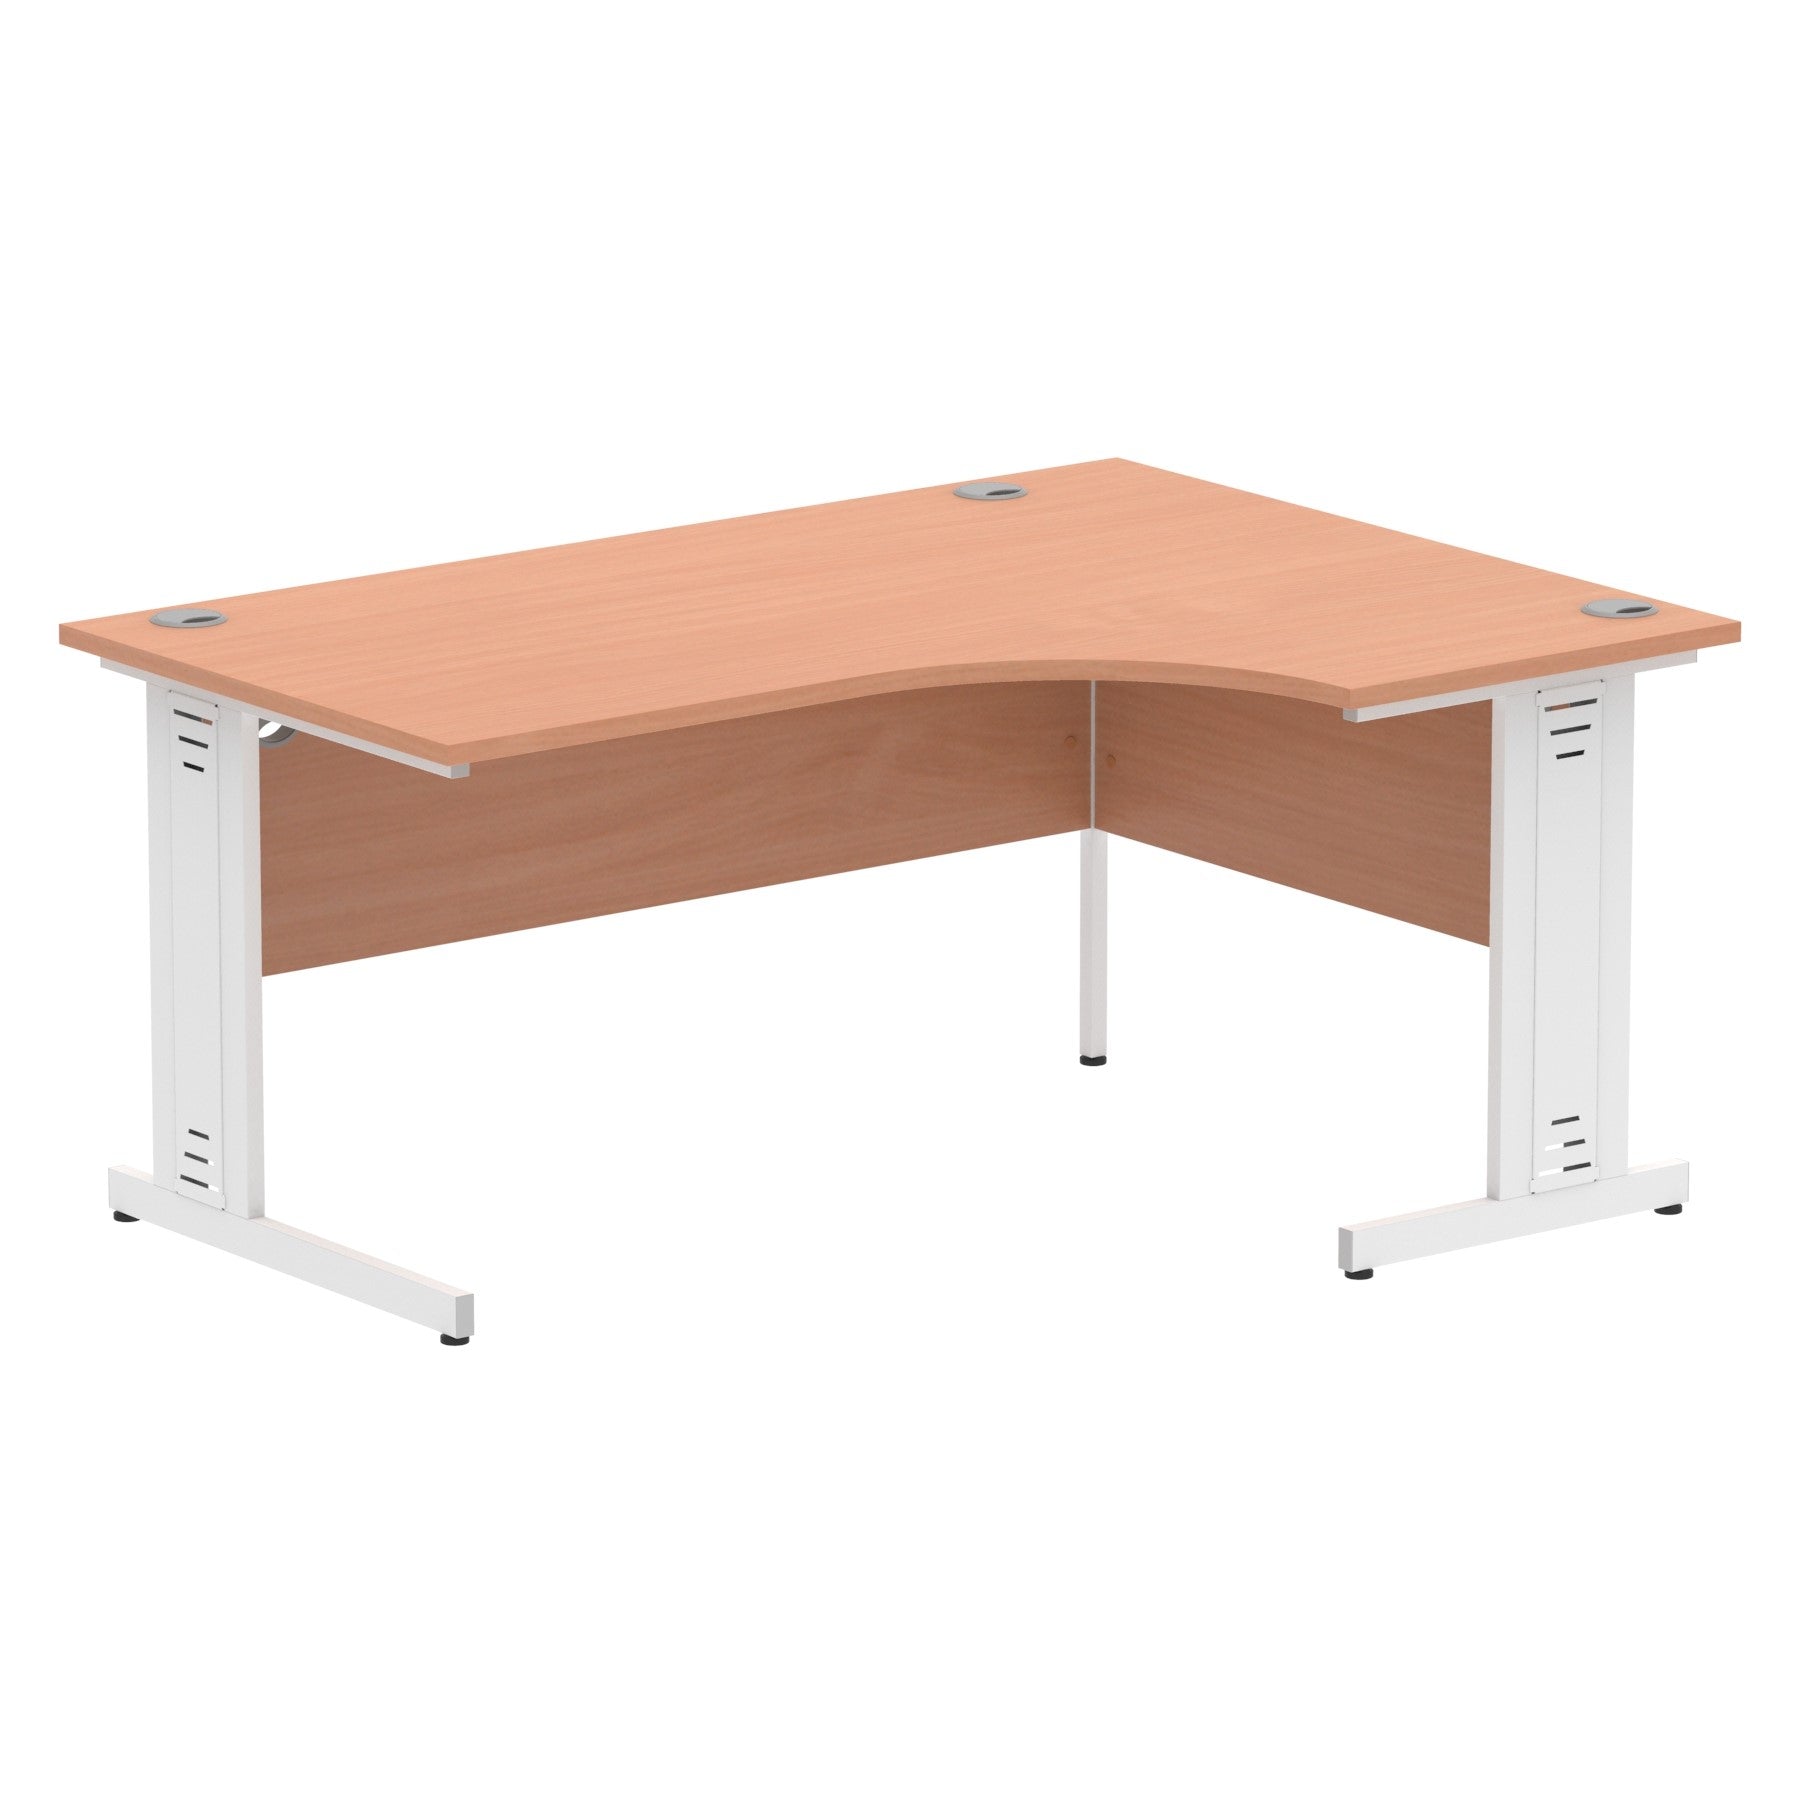 Impulse Contract Right Hand Crescent Cable Managed Leg Desk W1600 x D1200 x H730mm Beech Finish/White Frame - I001880 - NWT FM SOLUTIONS - YOUR CATERING WHOLESALER